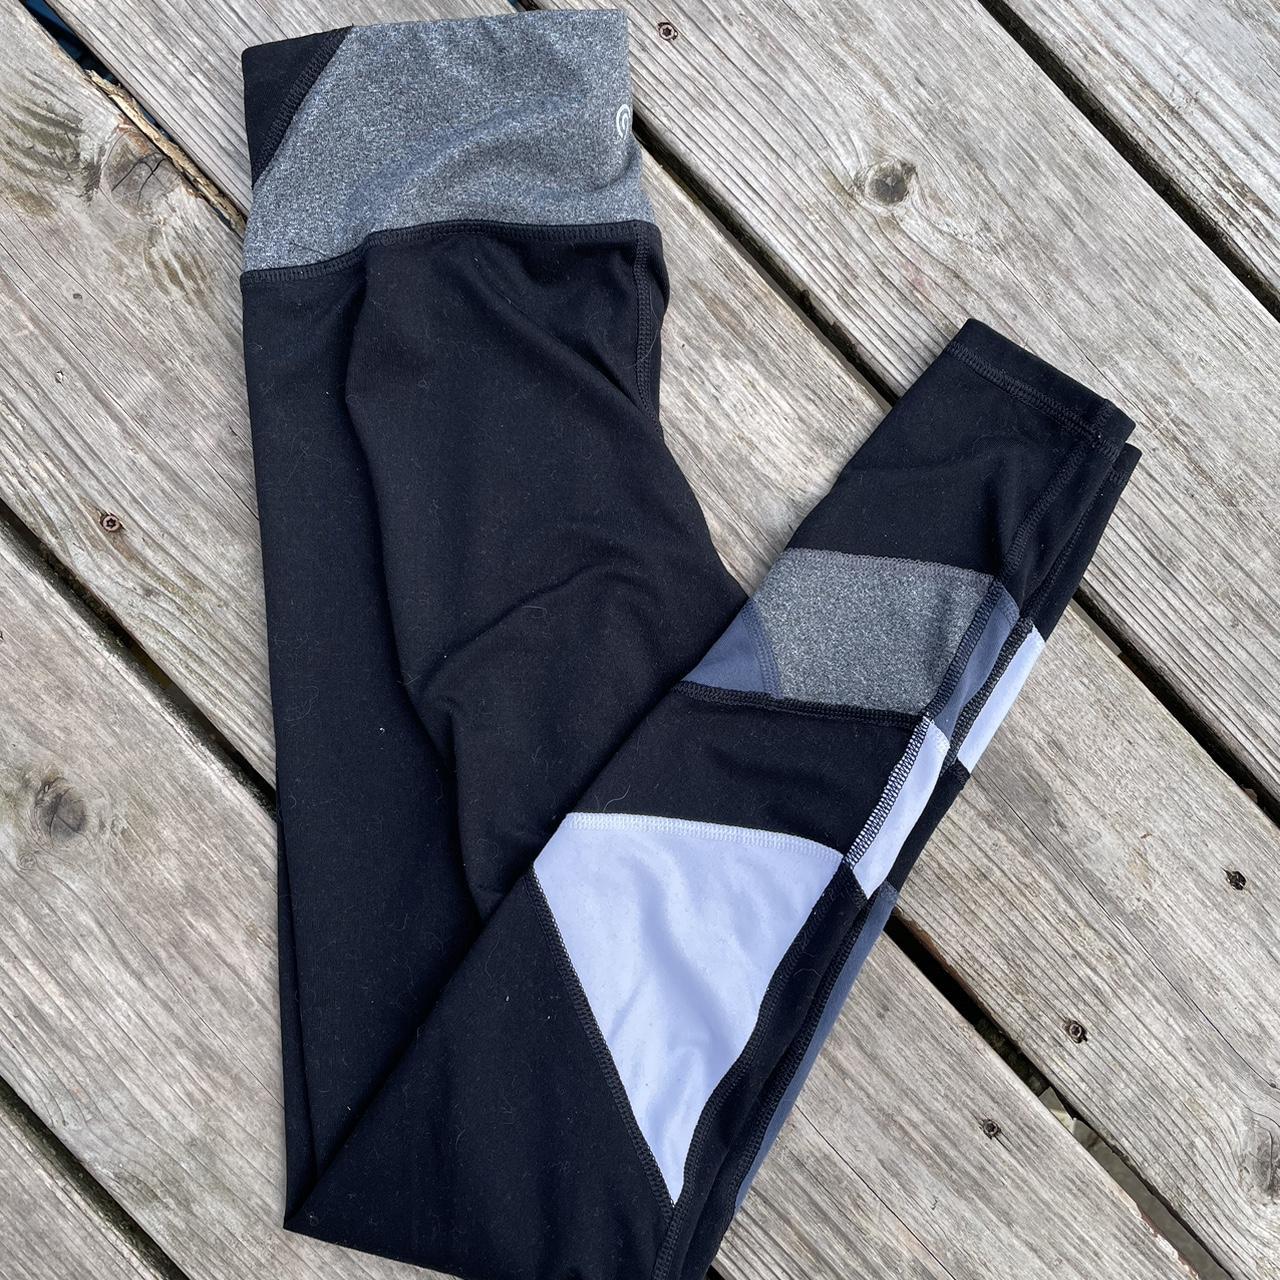 Target yoga pants with white and grey design on - Depop